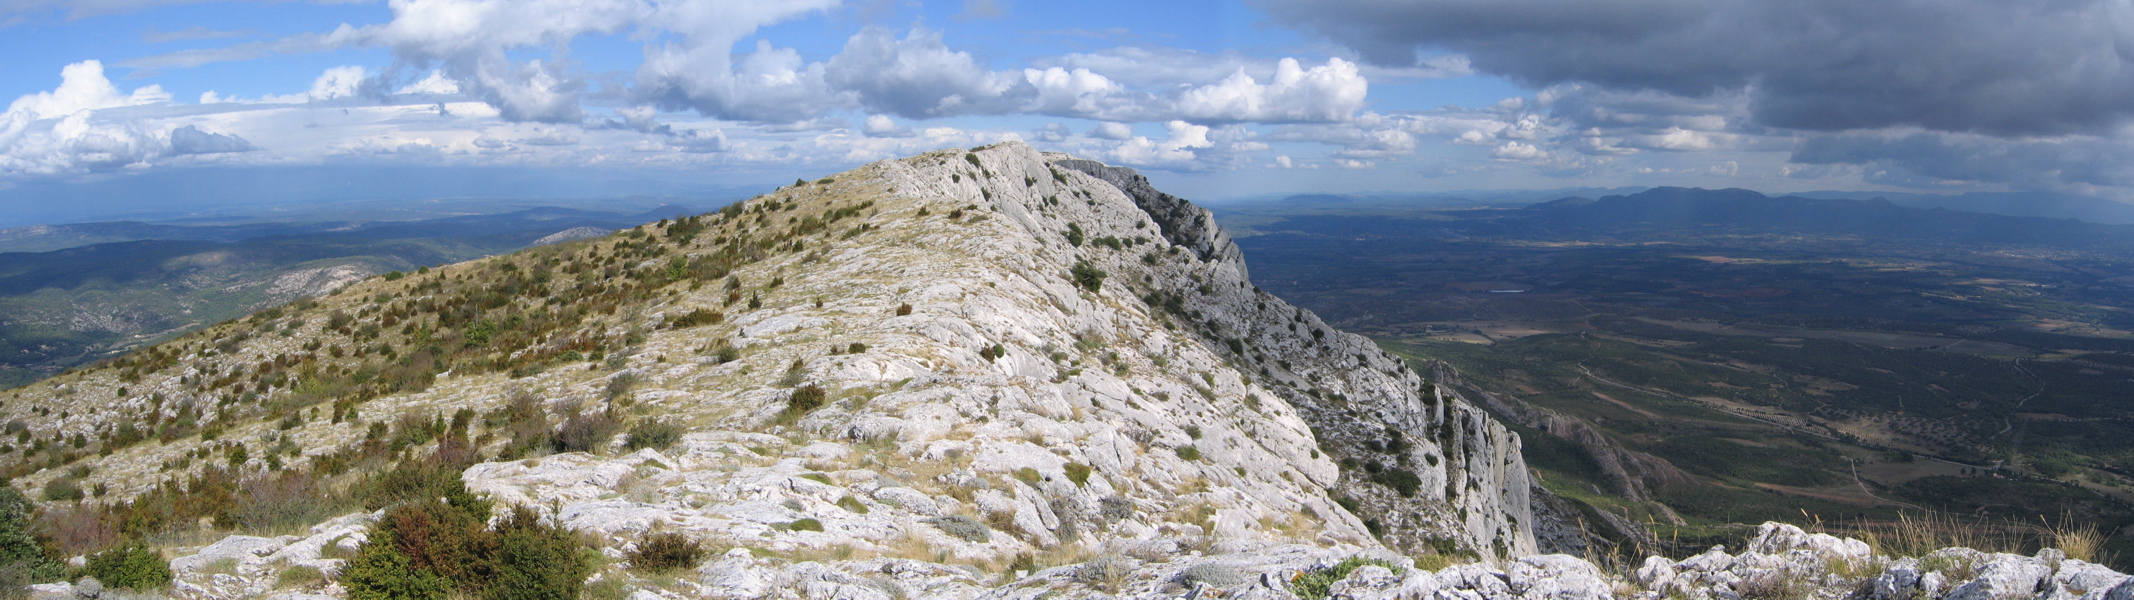 On top of the edge of the Sainte Victoire